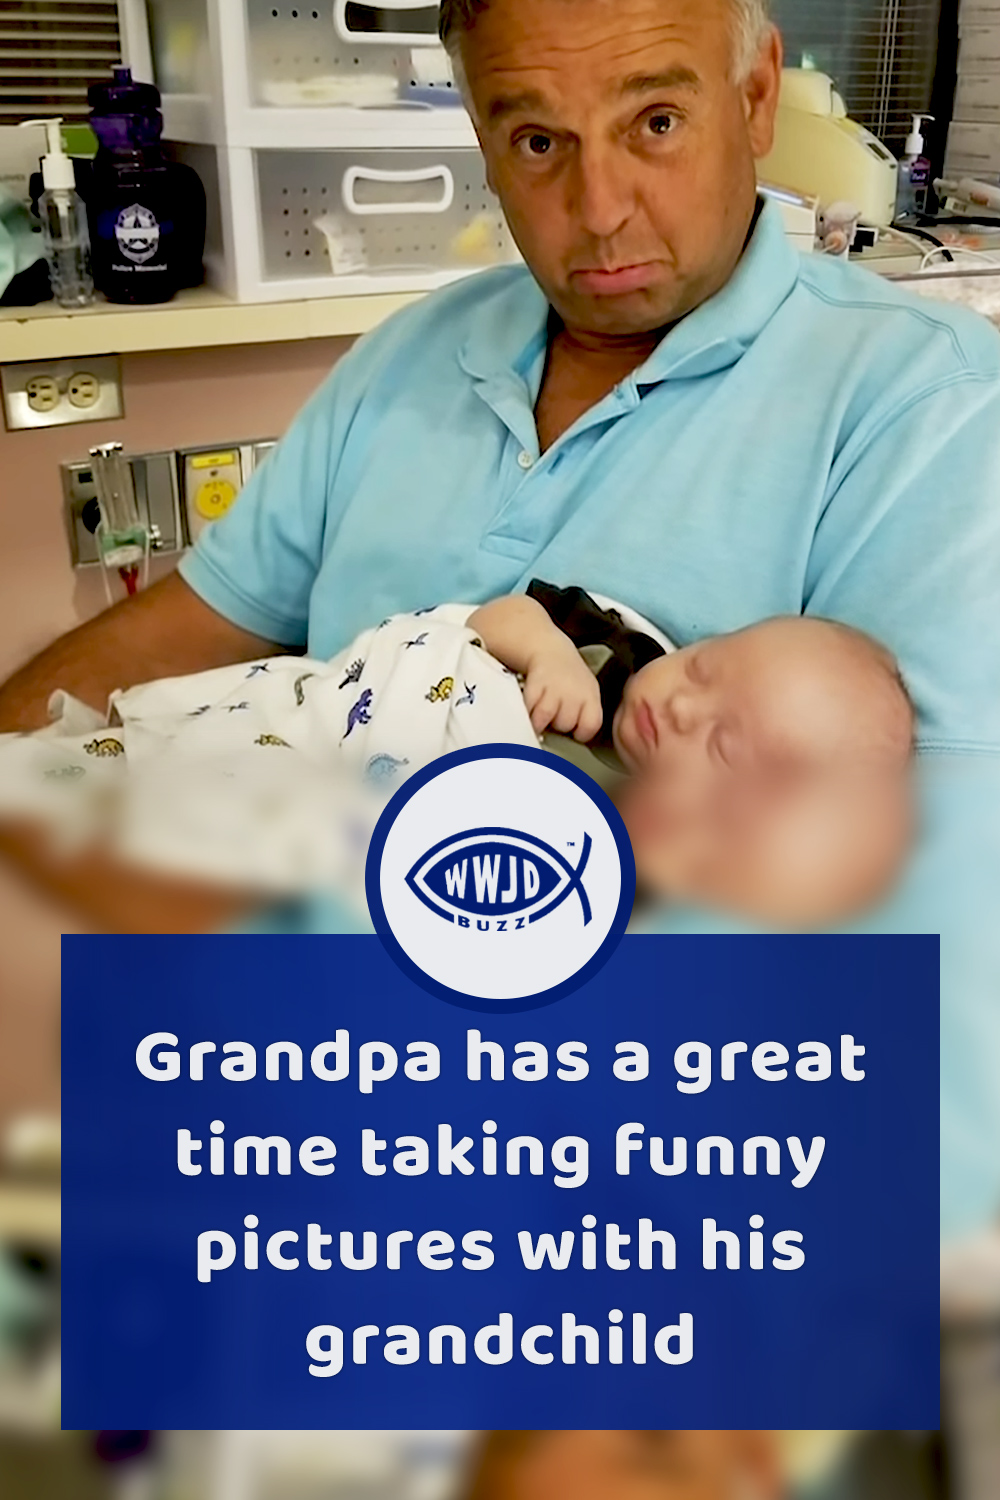 Grandpa has a great time taking funny pictures with his grandchild